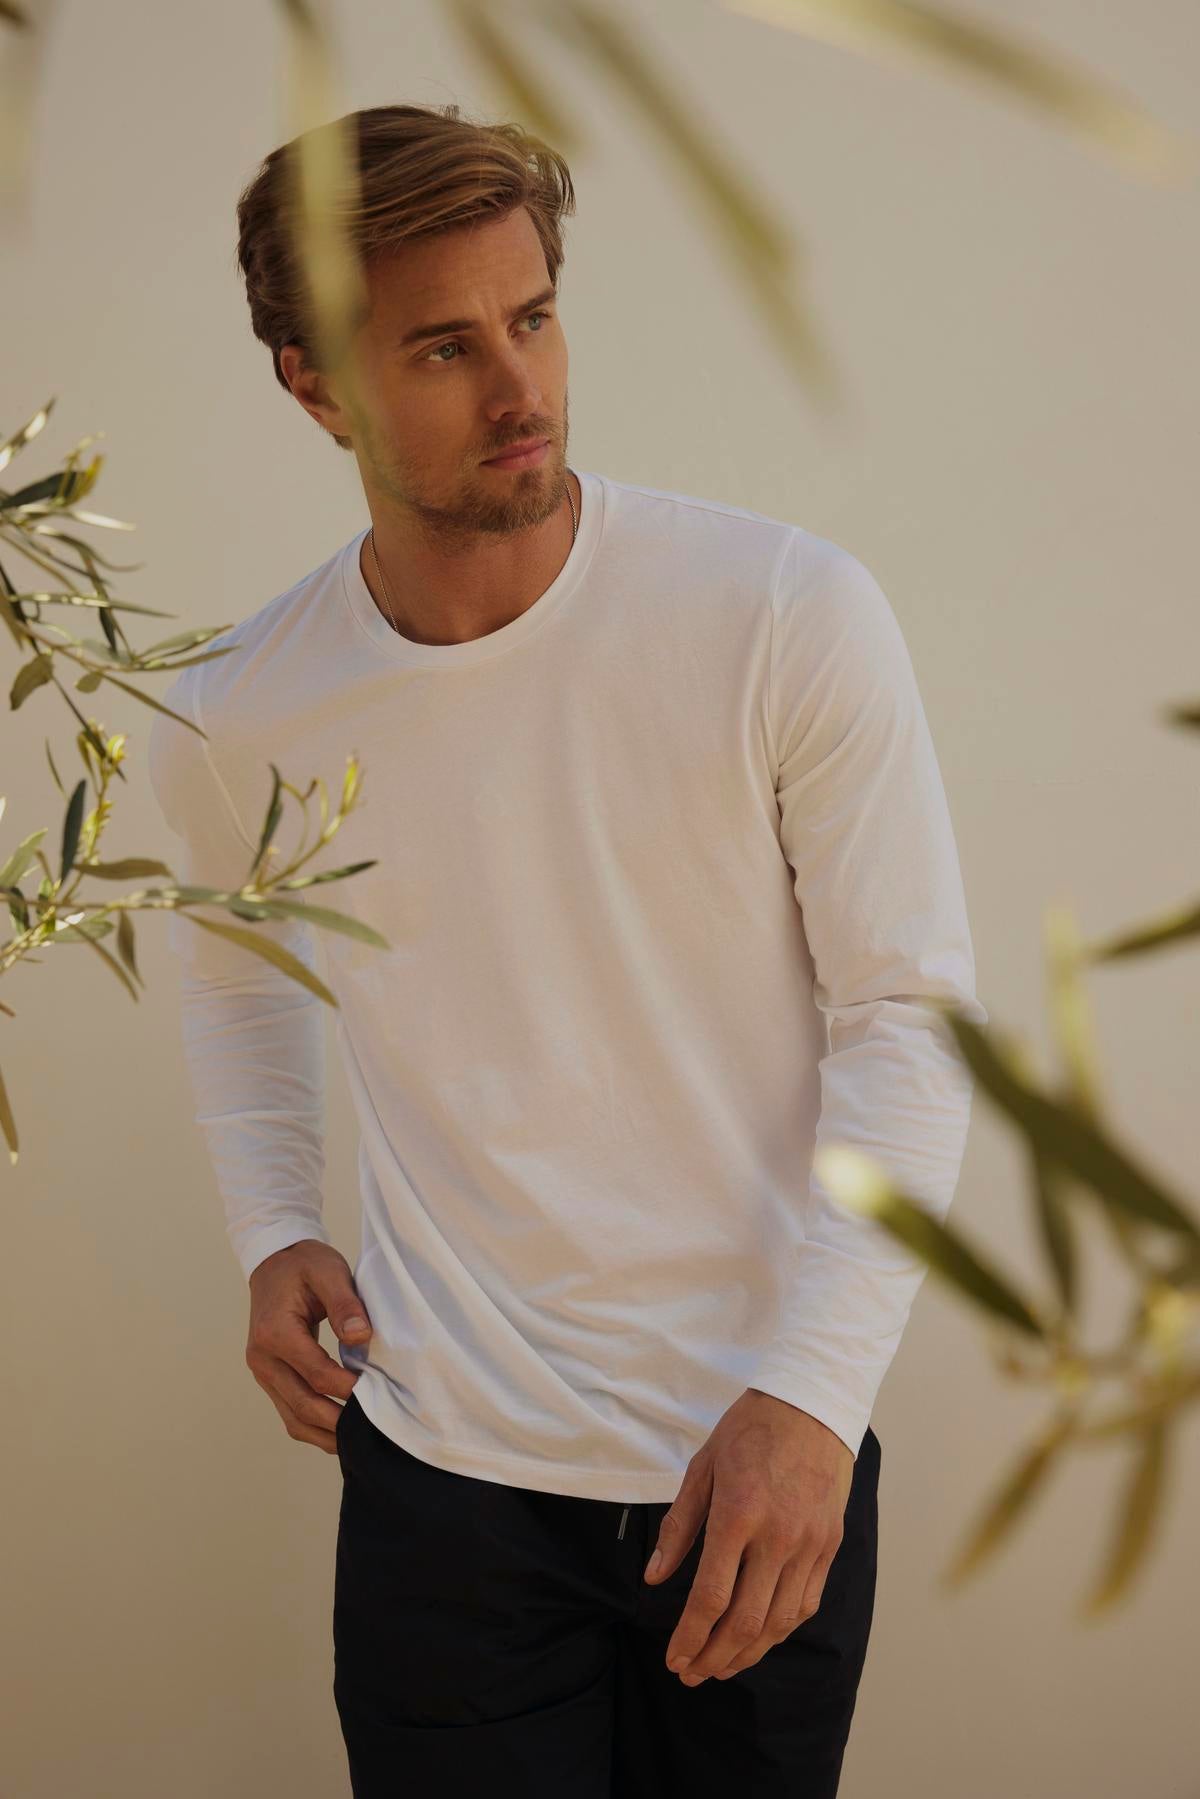 A man in a white slub knit long-sleeve shirt and black pants stands thoughtfully under soft lighting, with olive tree branches in the foreground wearing the Velvet by Graham & Spencer KAI CREW NECK TEE.-36640145735873